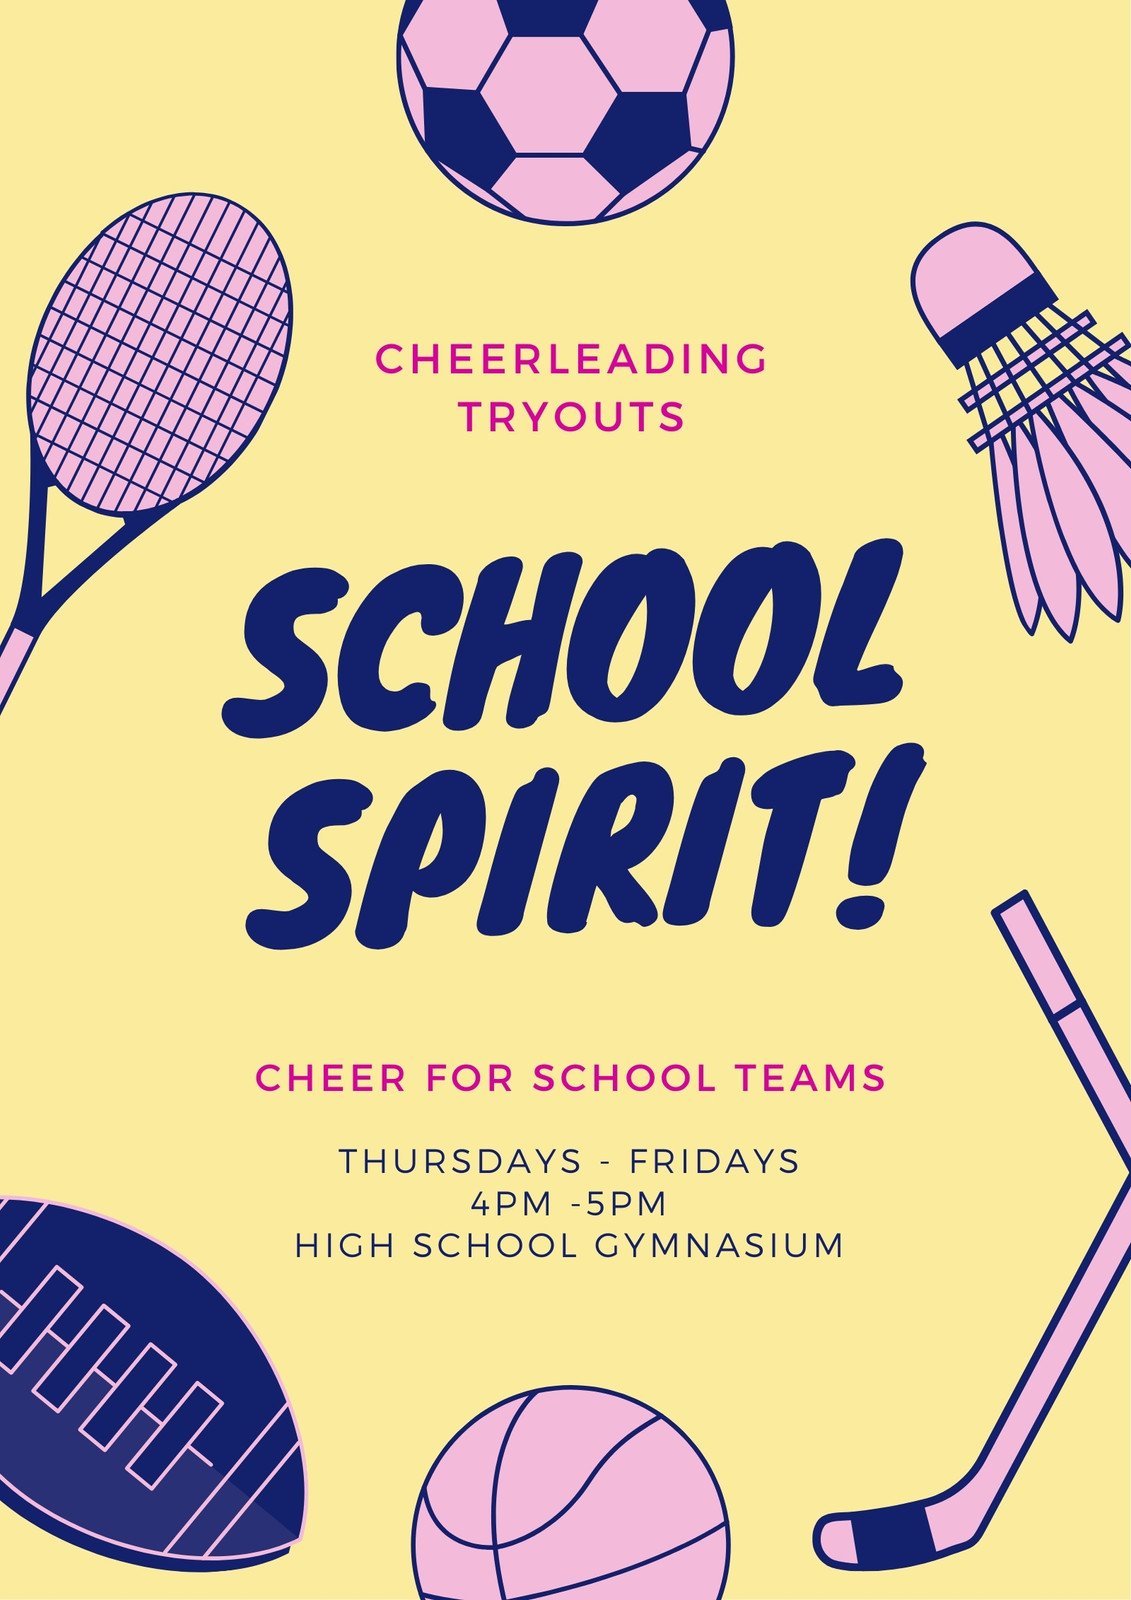 Sports Icons Cheerleading Poster in Yellow Pink Dark Blue Illustrative Style